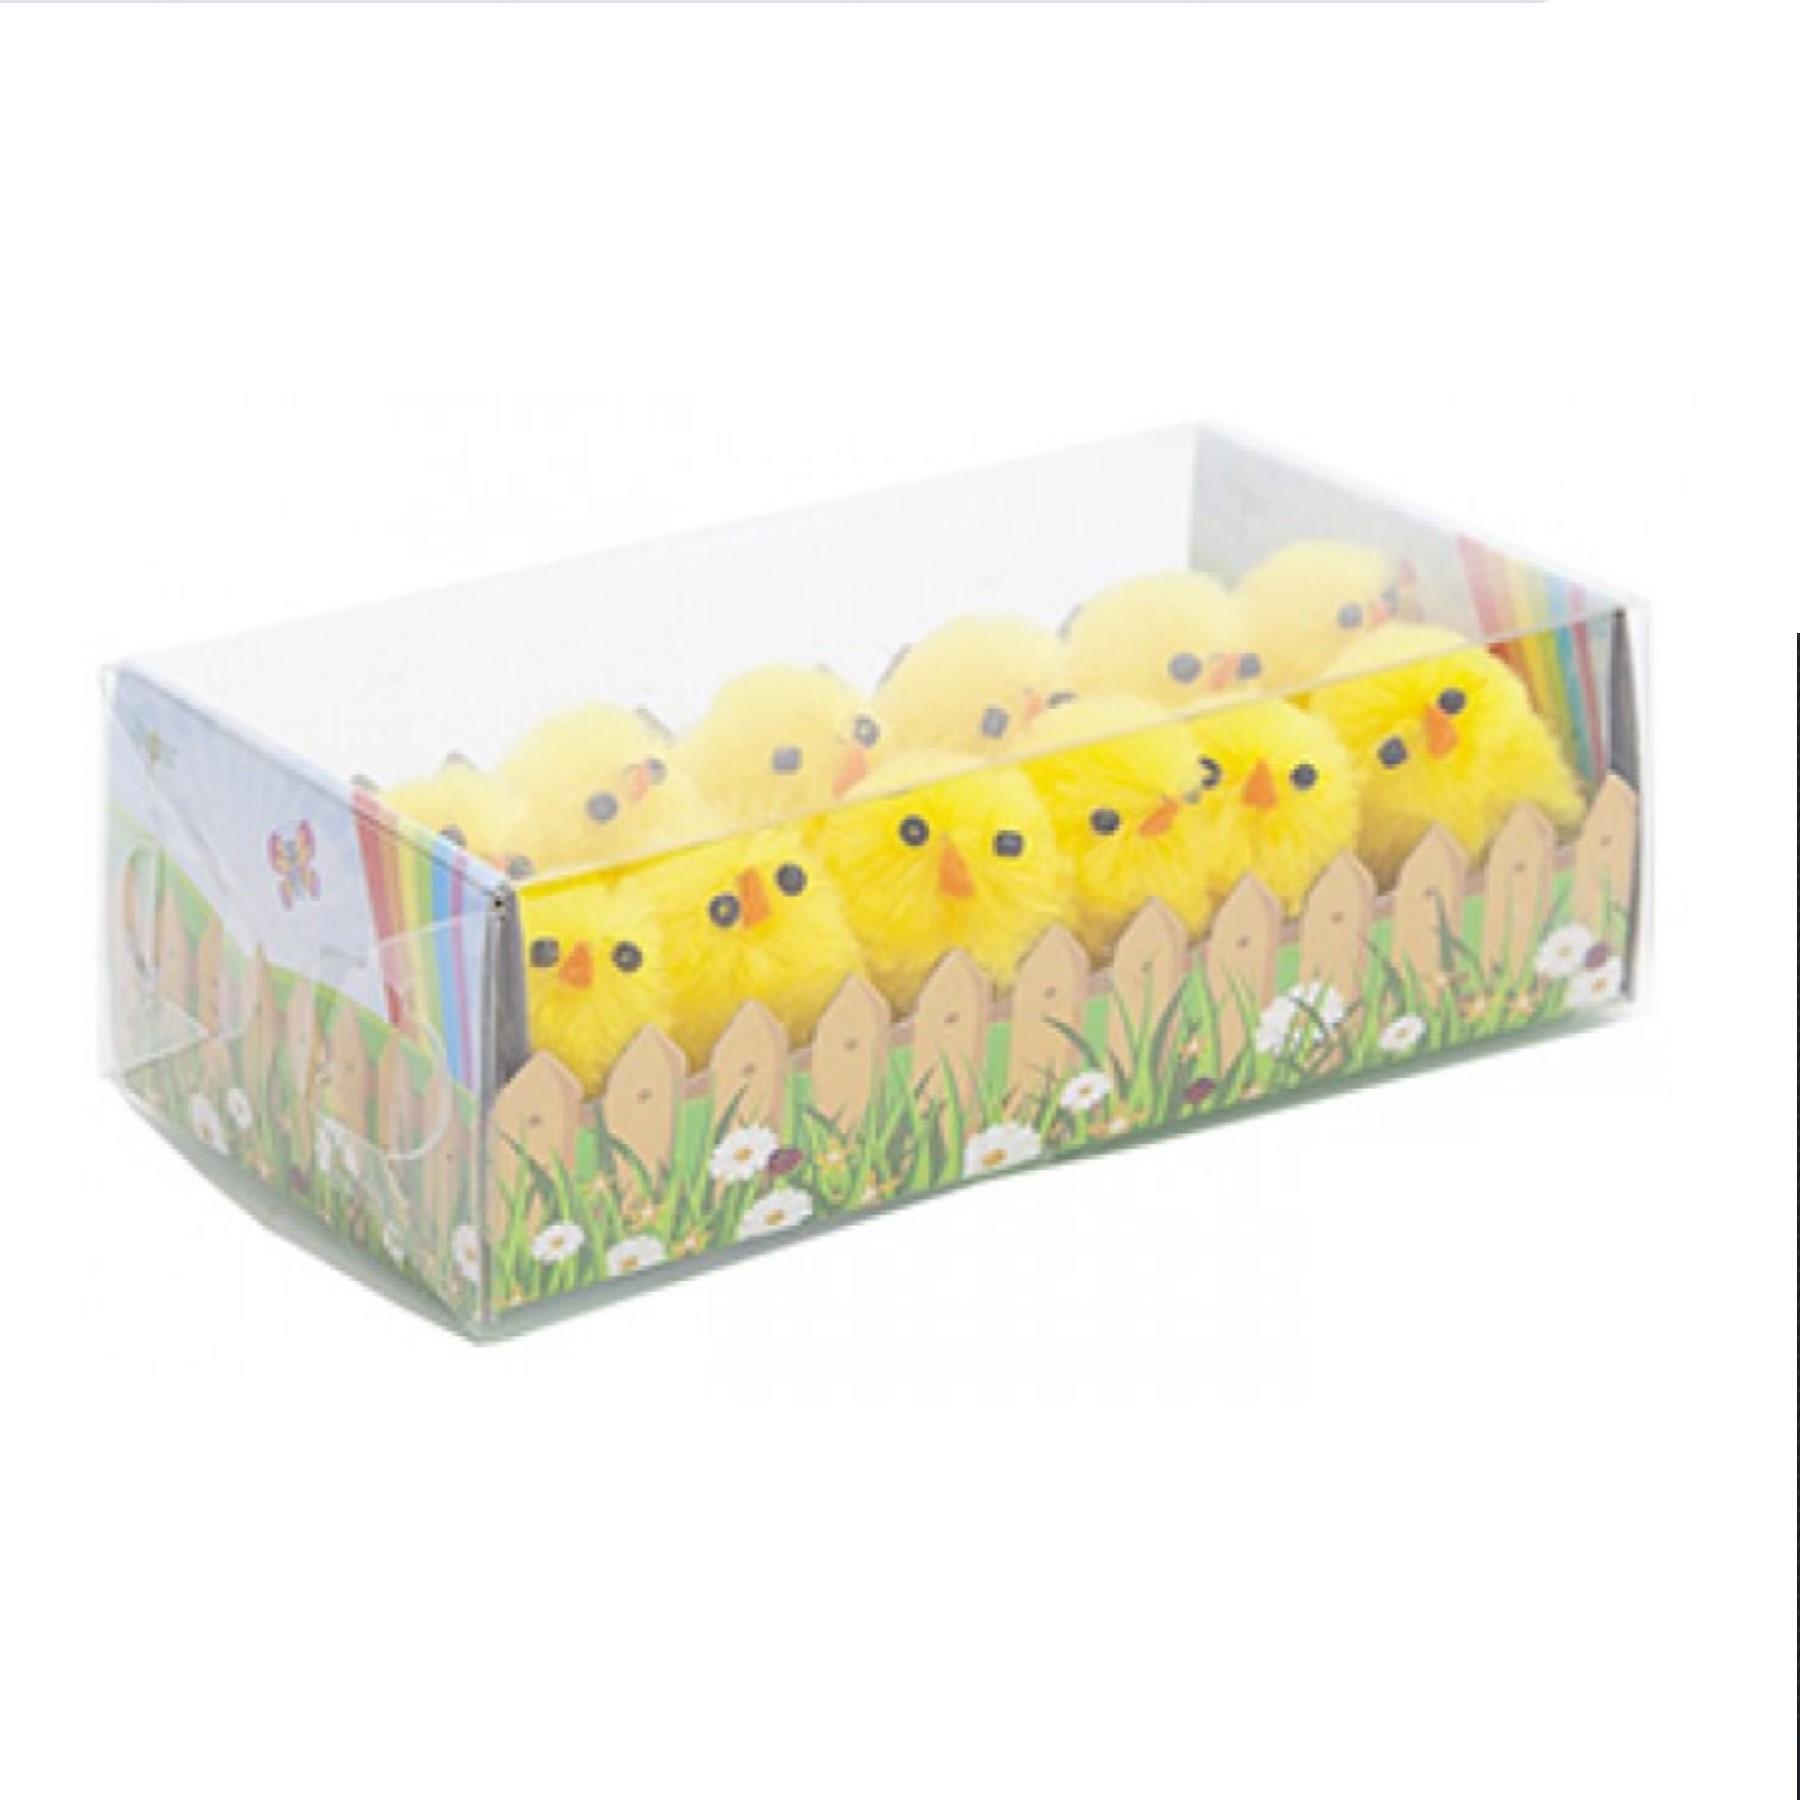 Easter Decorations, Bonnet Making, Arts and Crafts - 12 Pack Mini Chicks